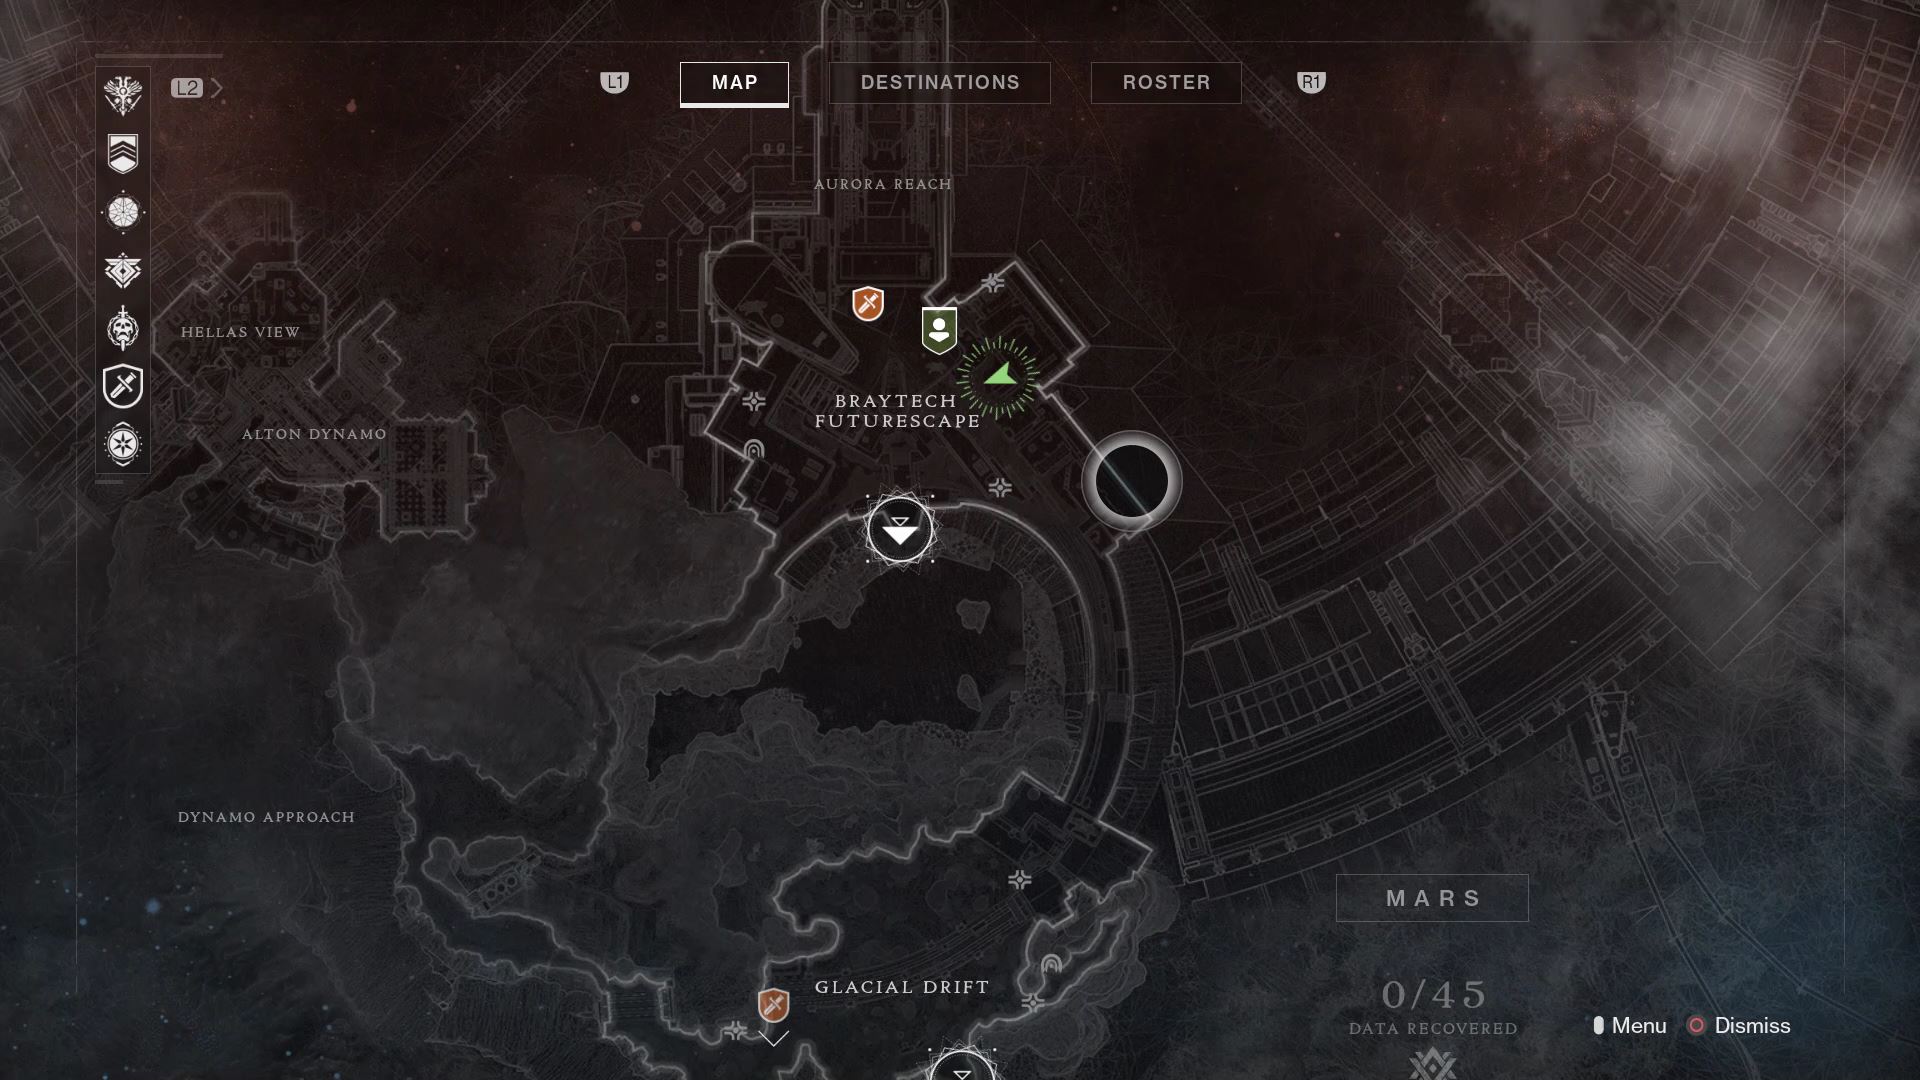 Mars, Gold Chests - Destiny Game Guide